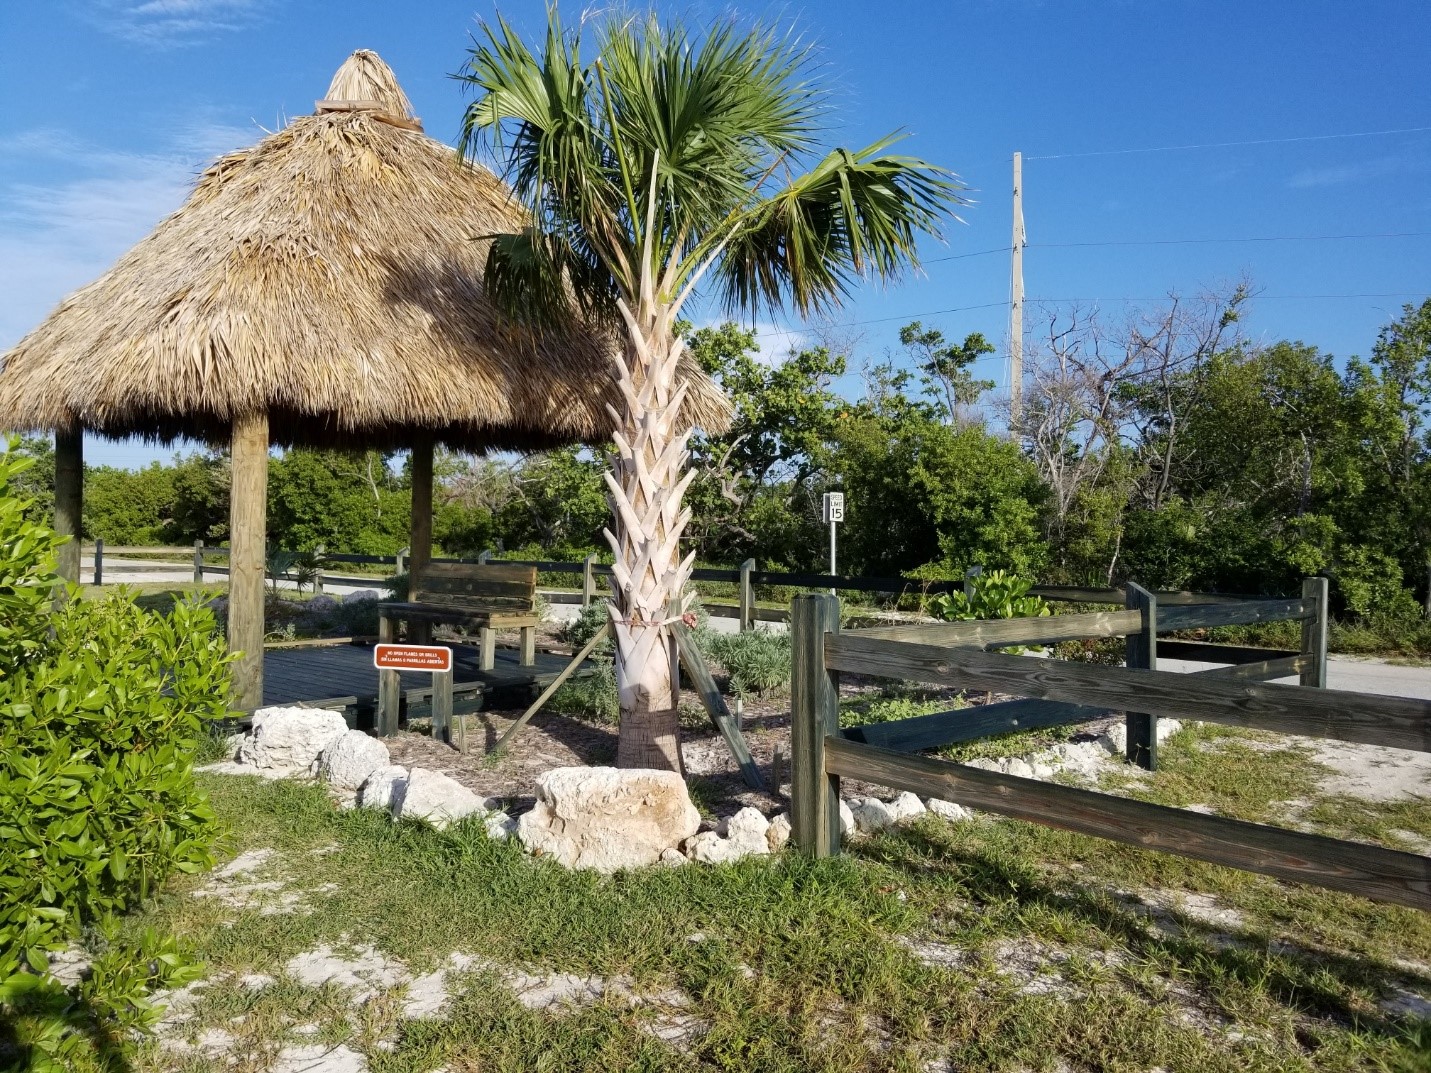 The picnic area of the park has been replanted. You can see a picnic shelter, a palm tree and fencing.